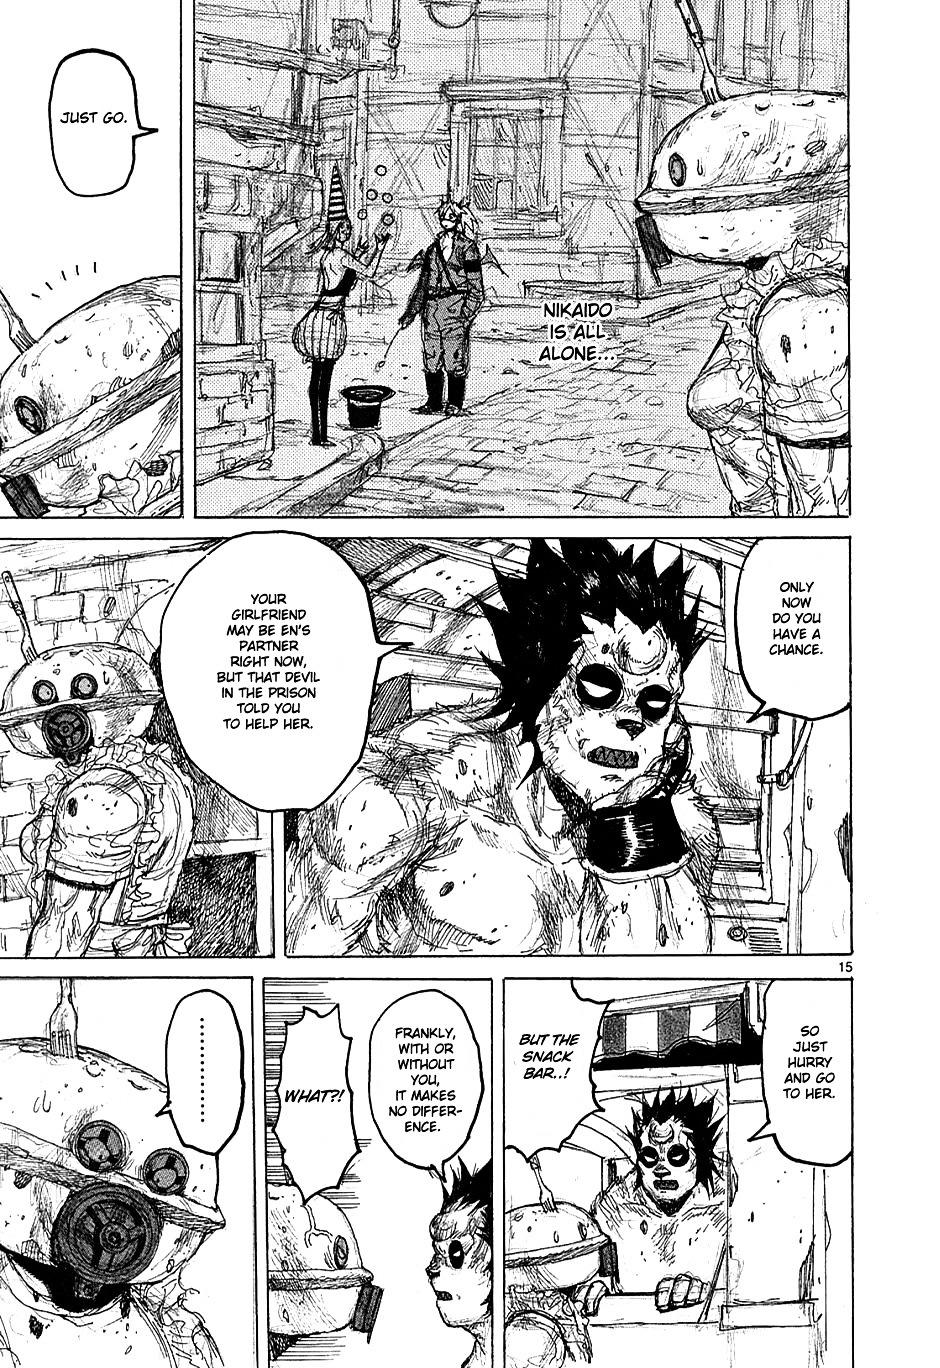 Dorohedoro Chapter 38 : Meatbags Free For All page 15 - Mangakakalot